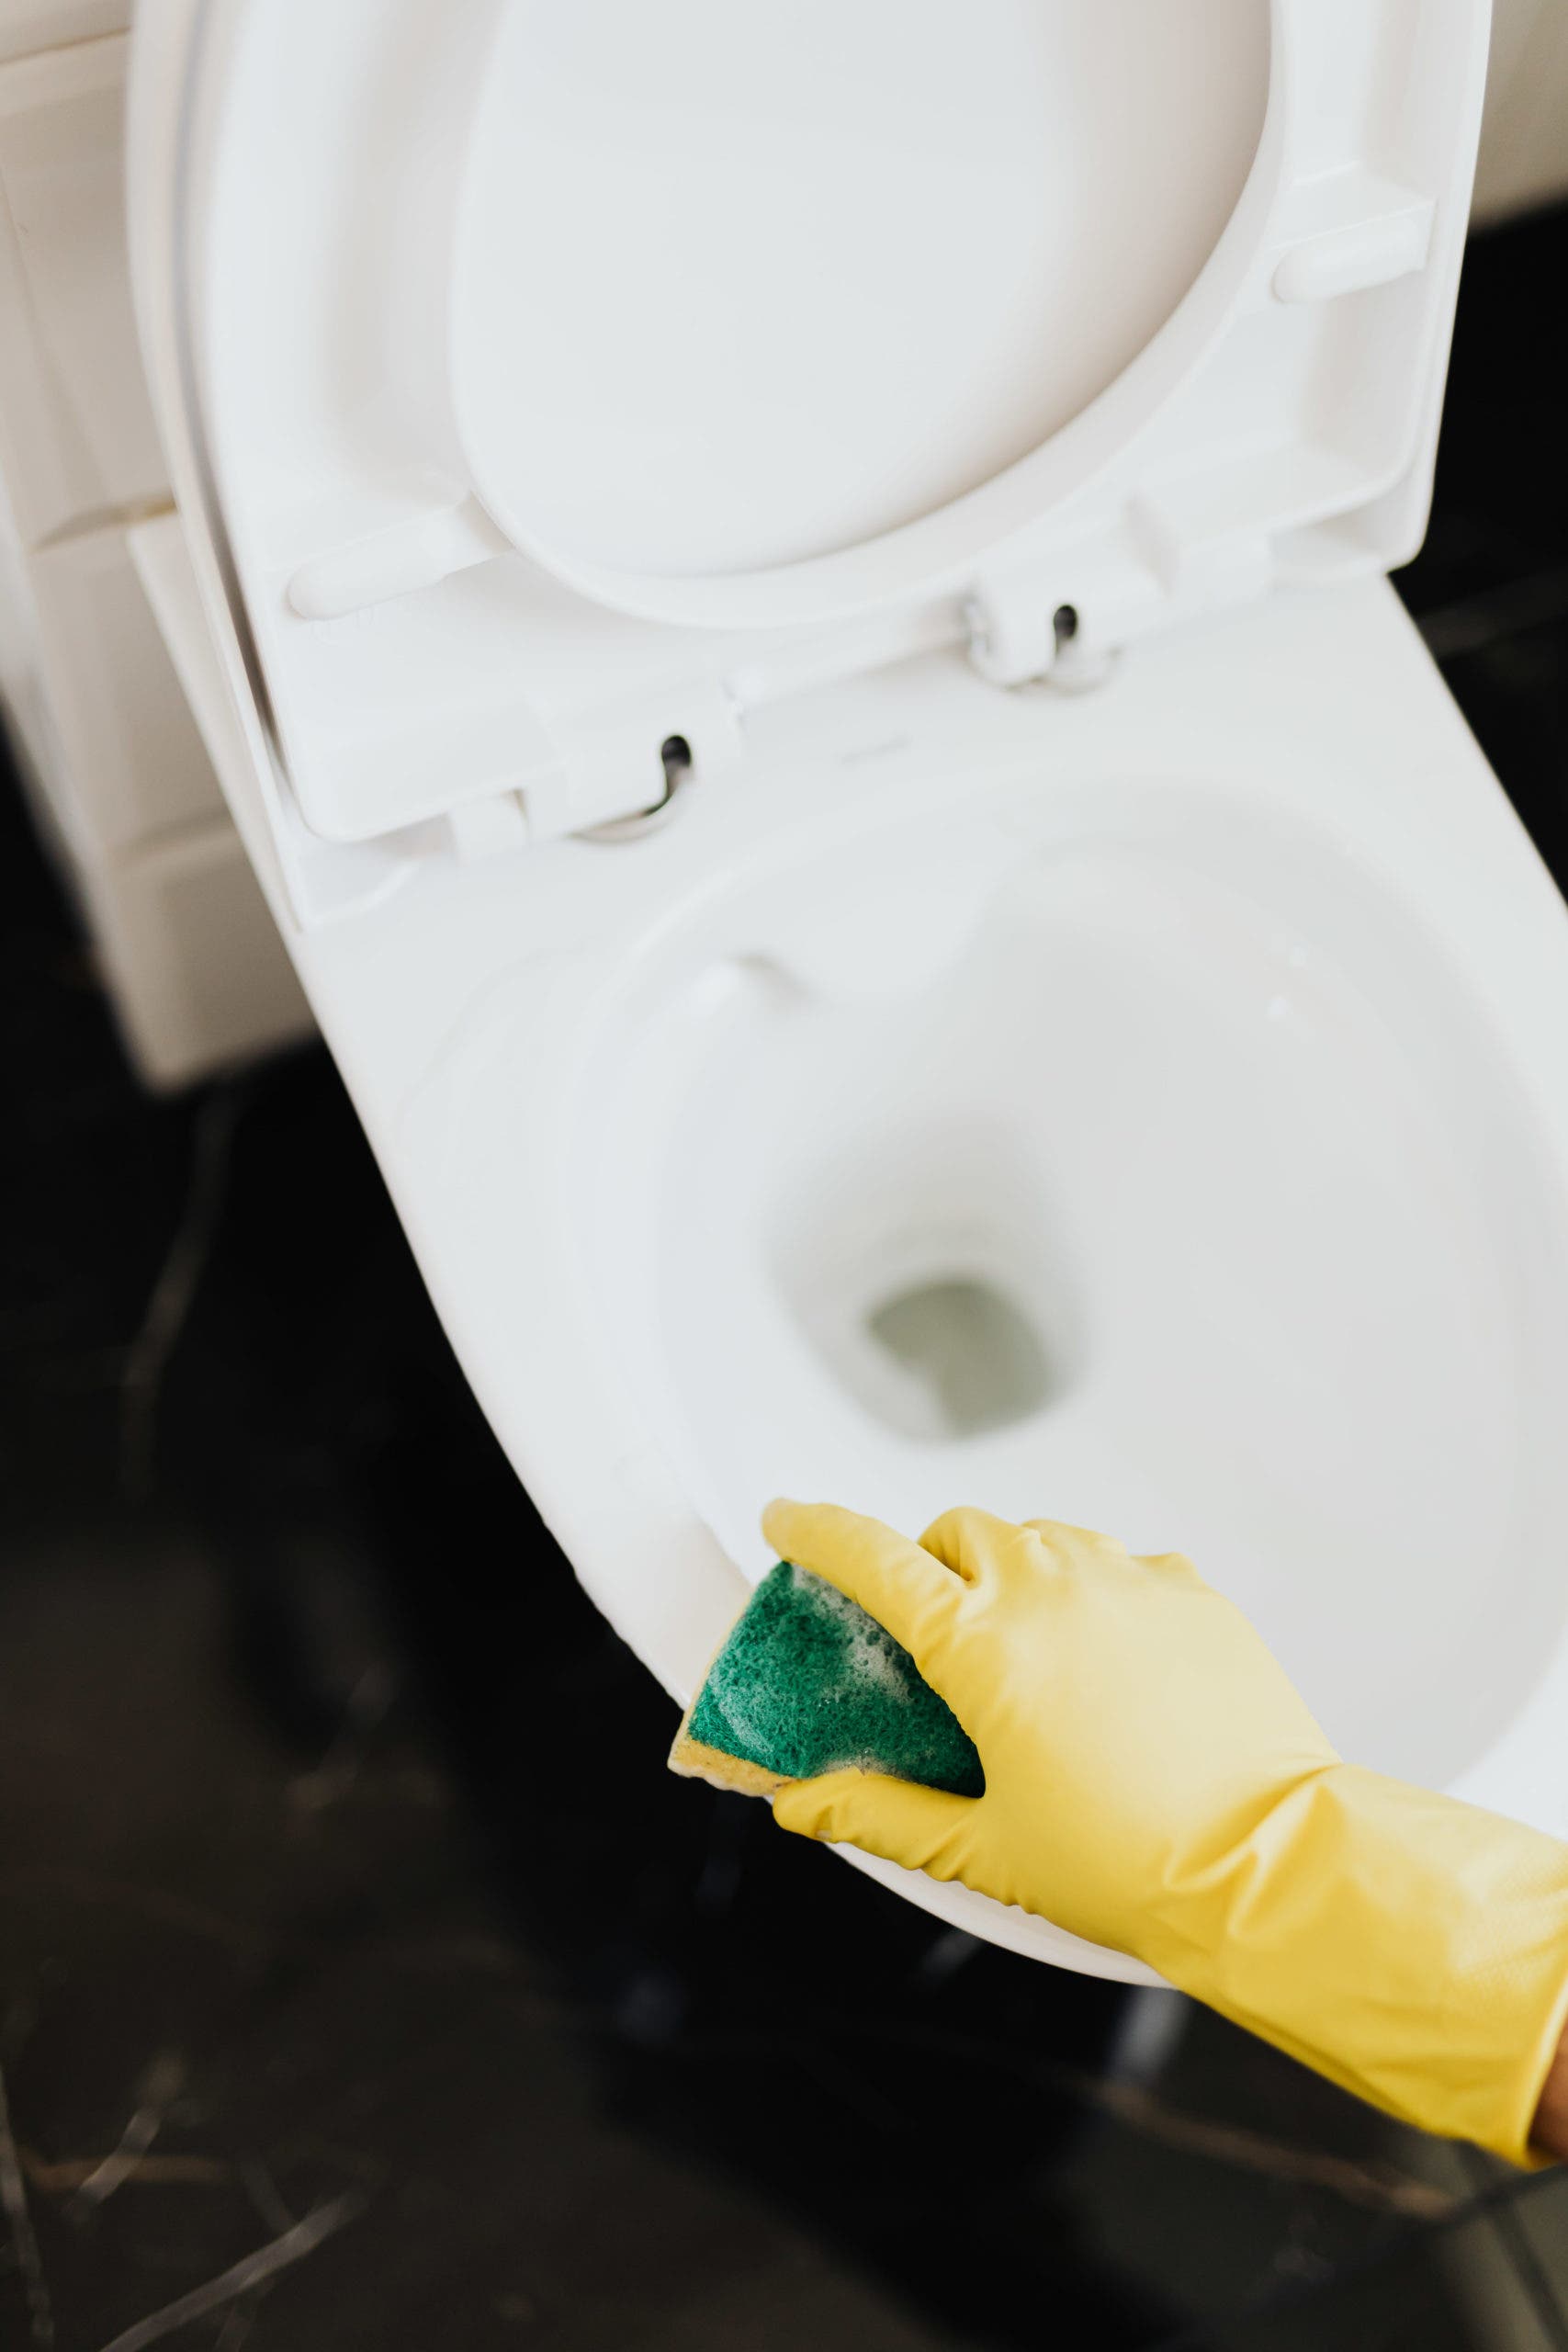 5 Places Germs Hide in Your Bathroom